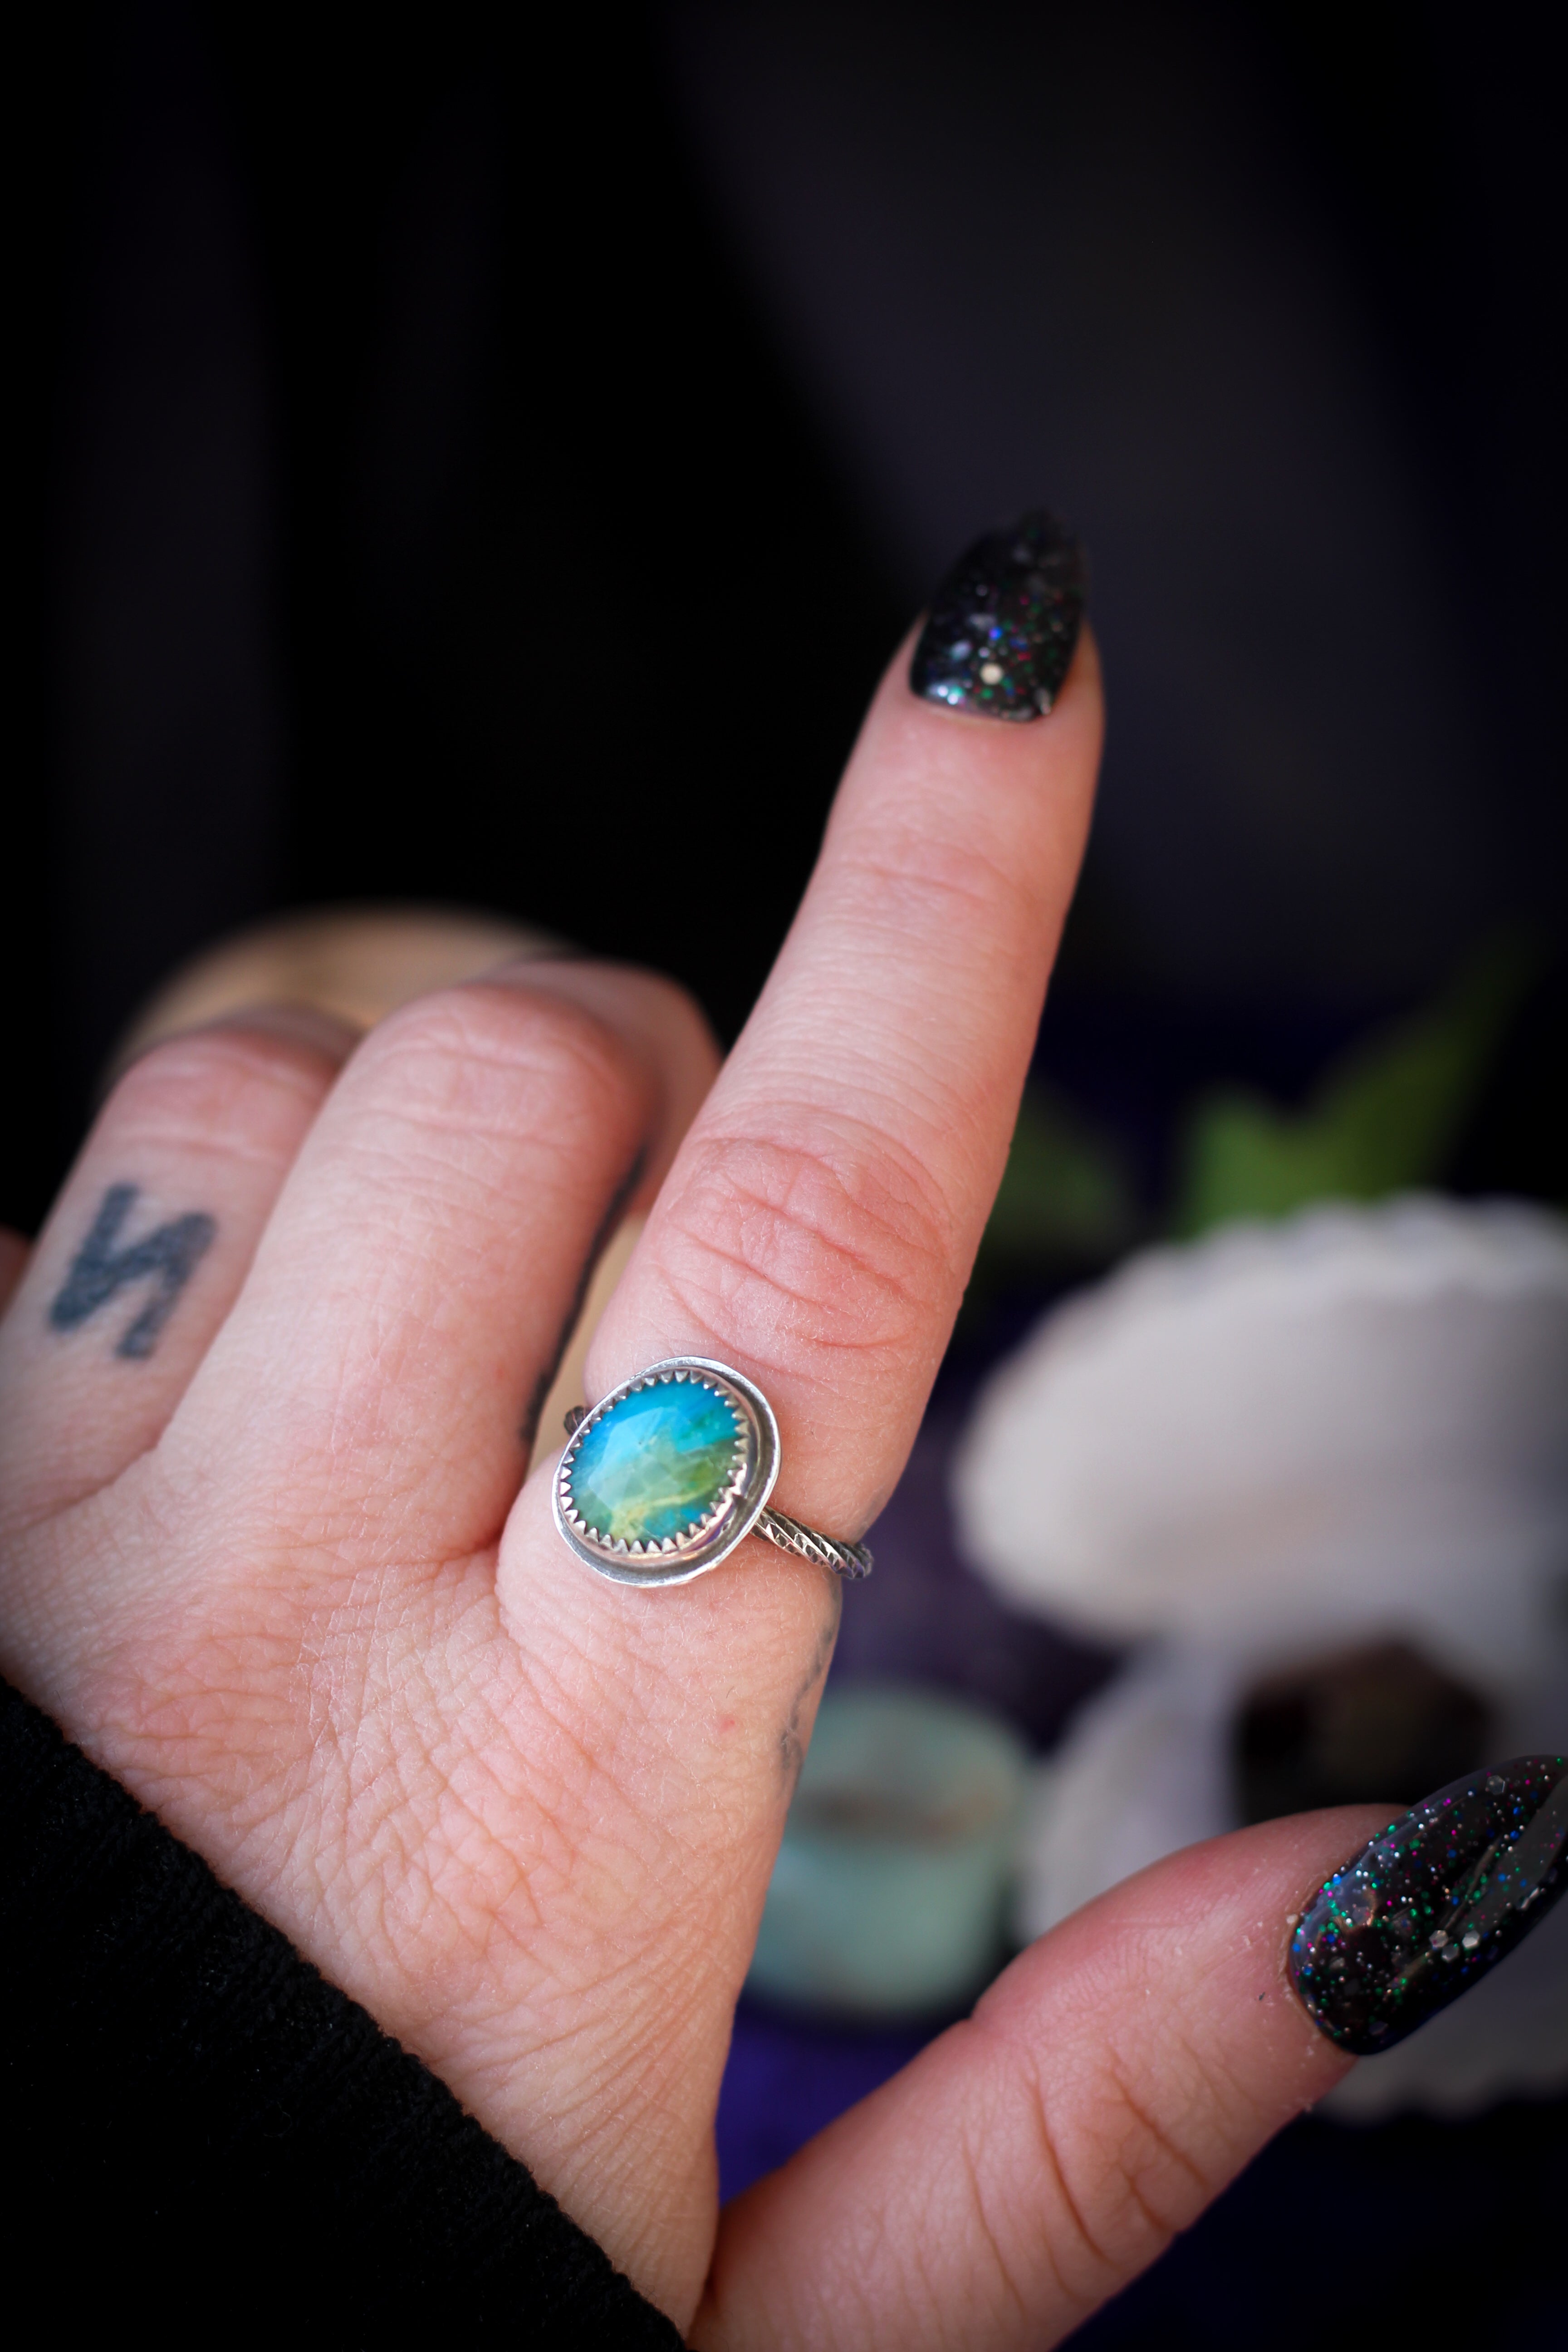 Les Atlantes - Peruvian opal ring with chrysocolla inclusions, silver